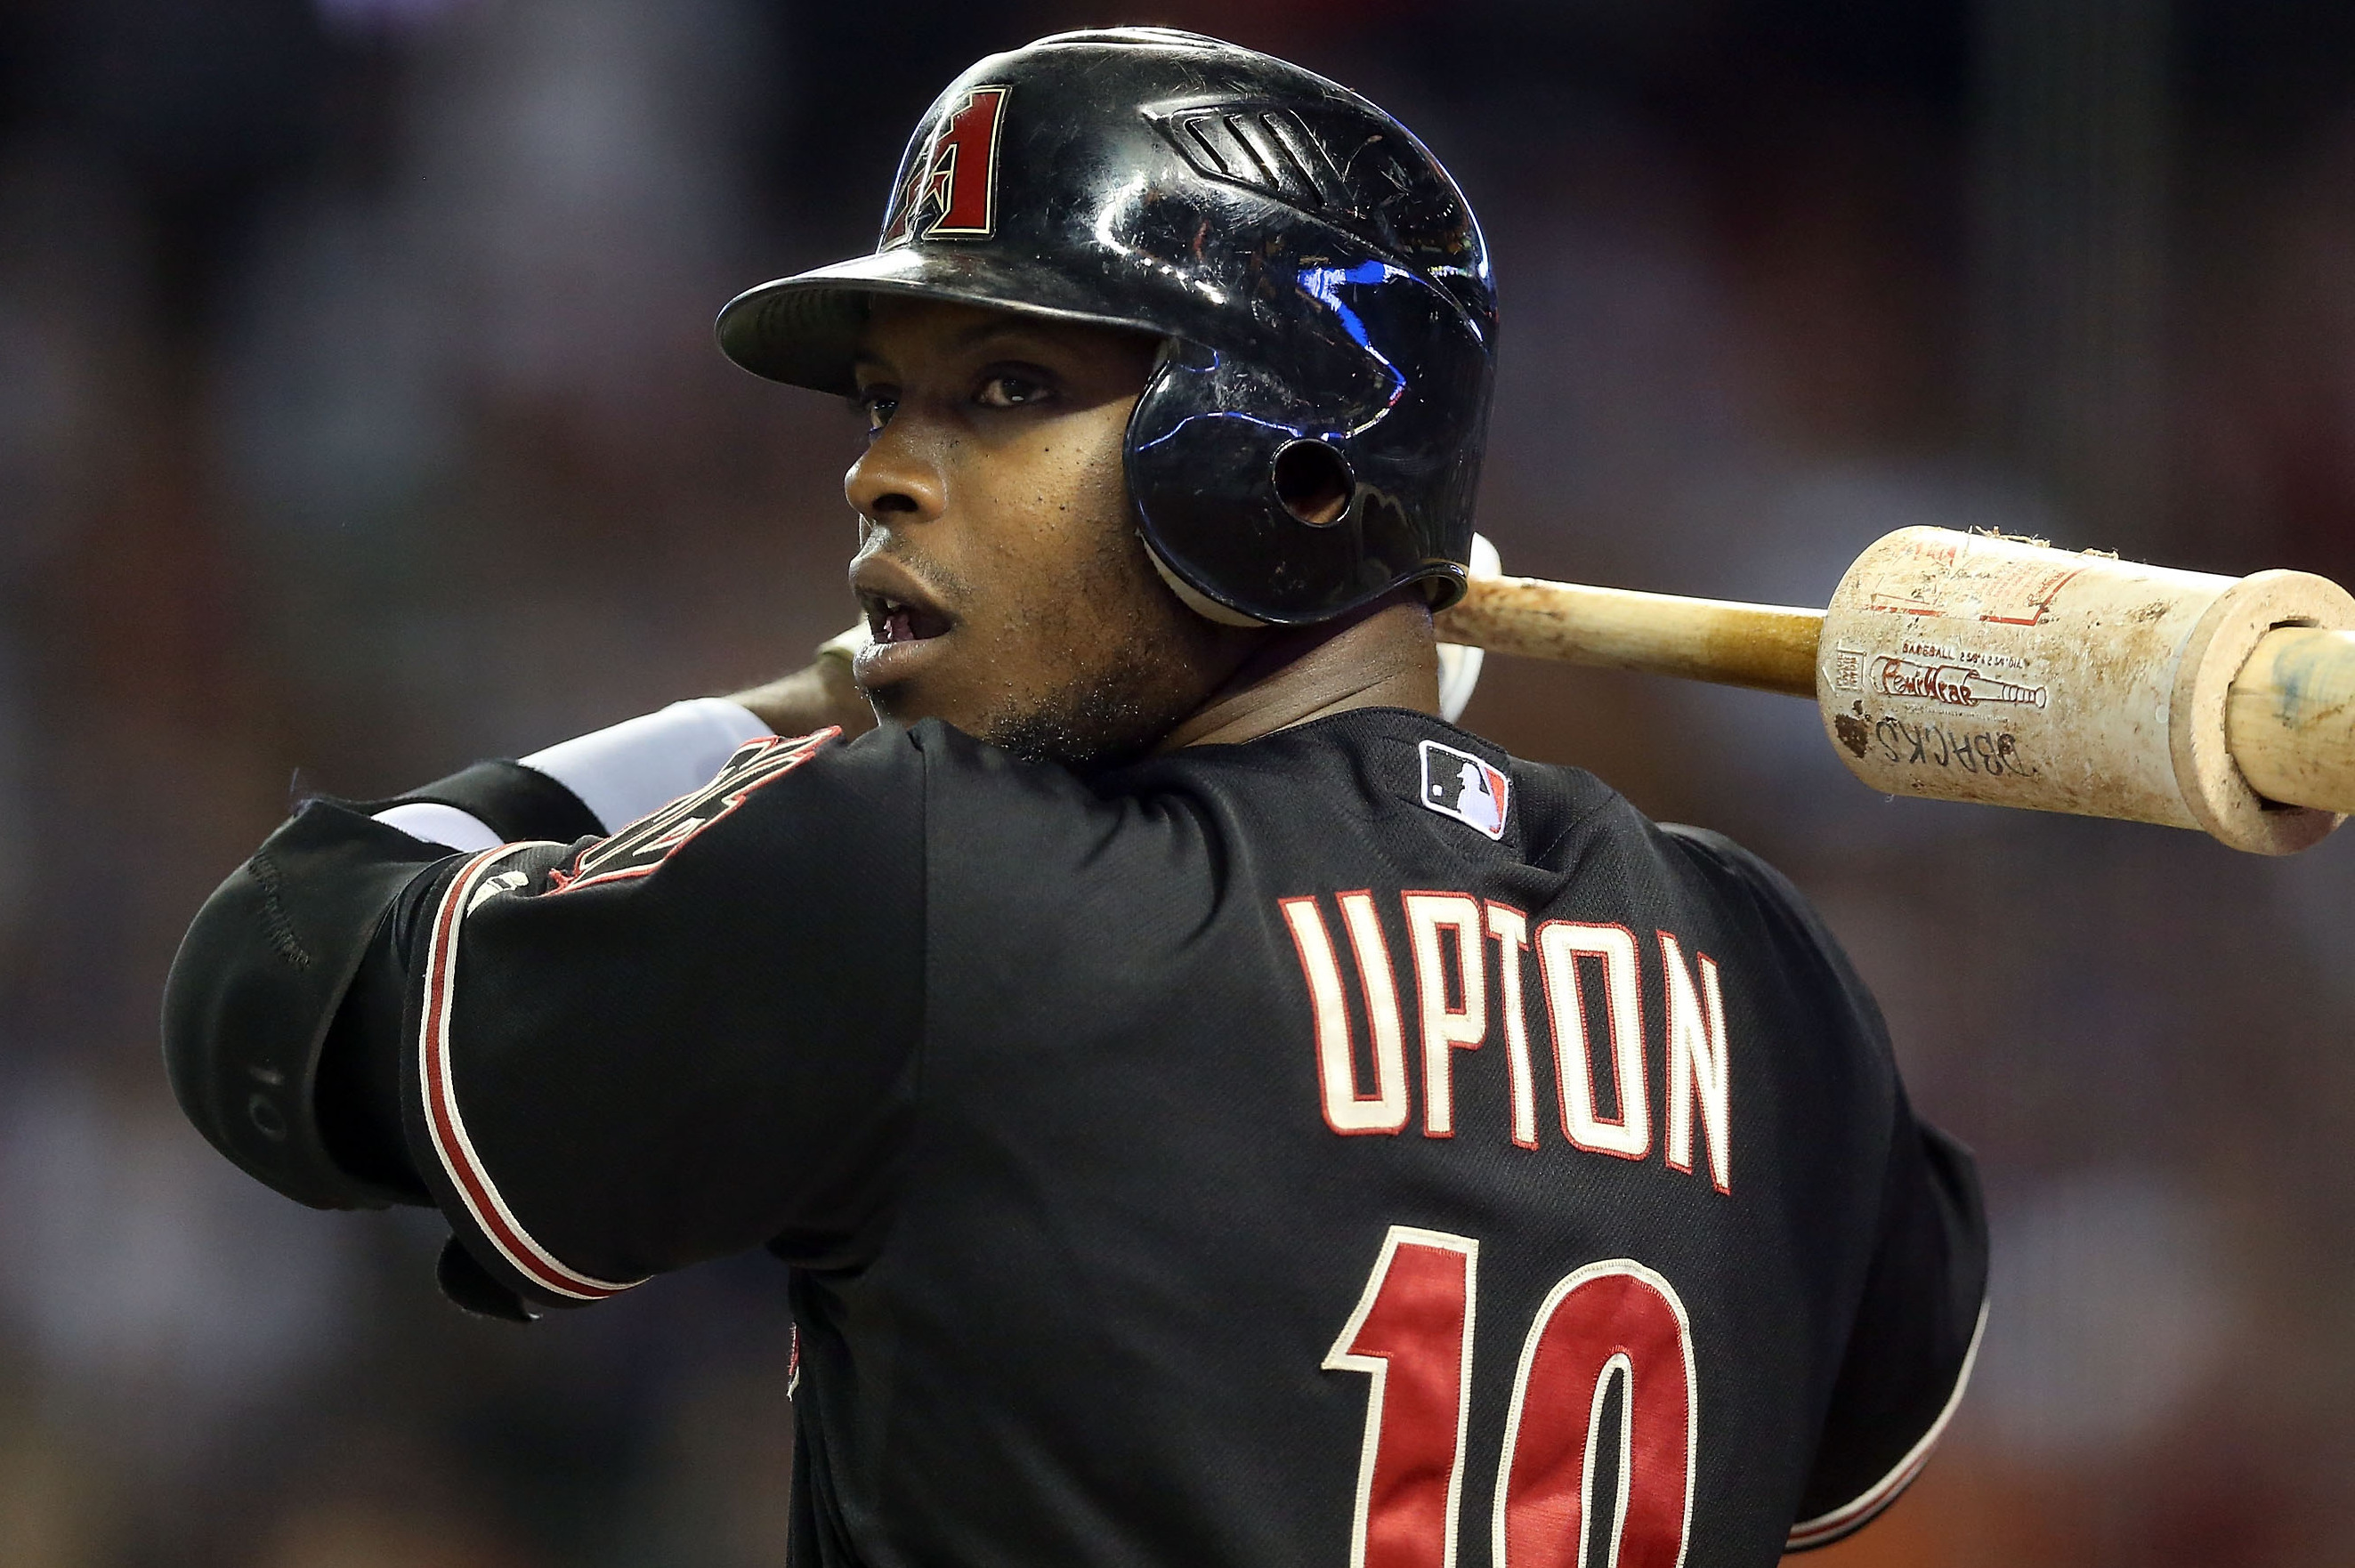 10 years later, Nick Ahmed was prize of Justin Upton trade